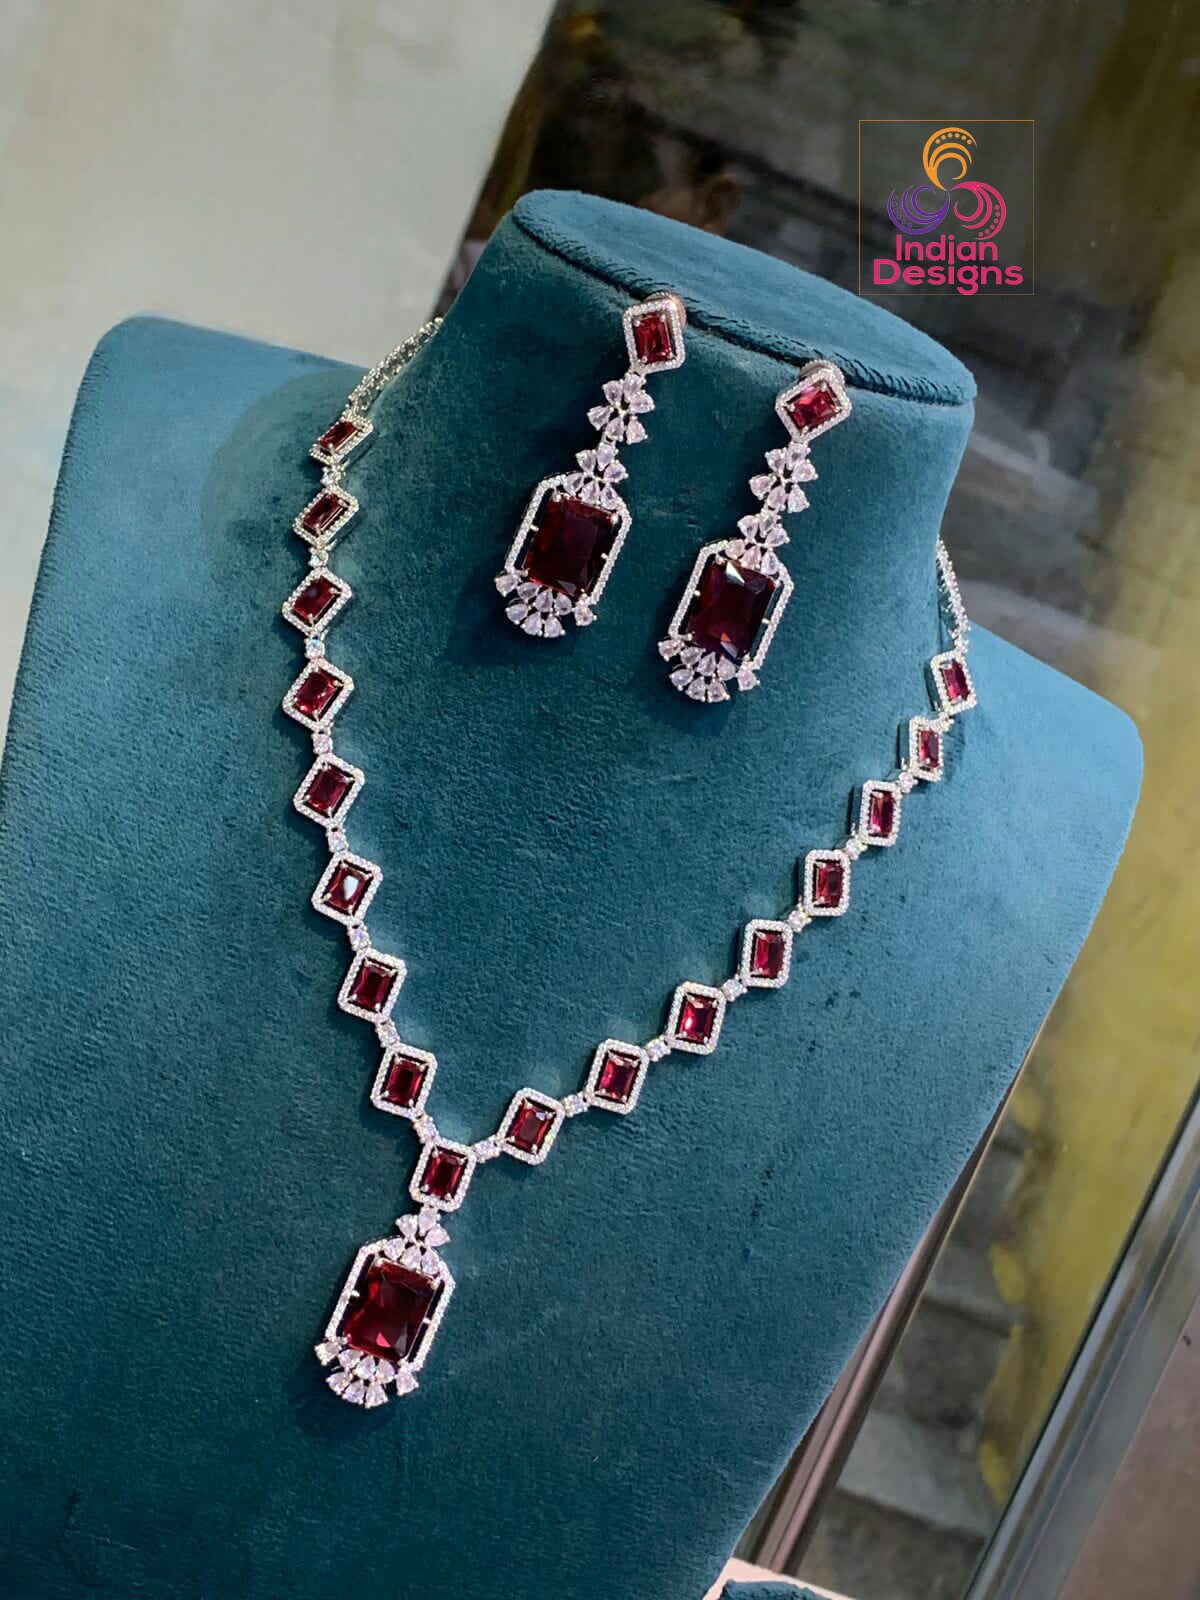 Exclusive Silver-Toned American Diamond Necklace and Earring Set | Indian Wedding Jewelry |Ruby Diamond Silver necklace set | Gift For Her